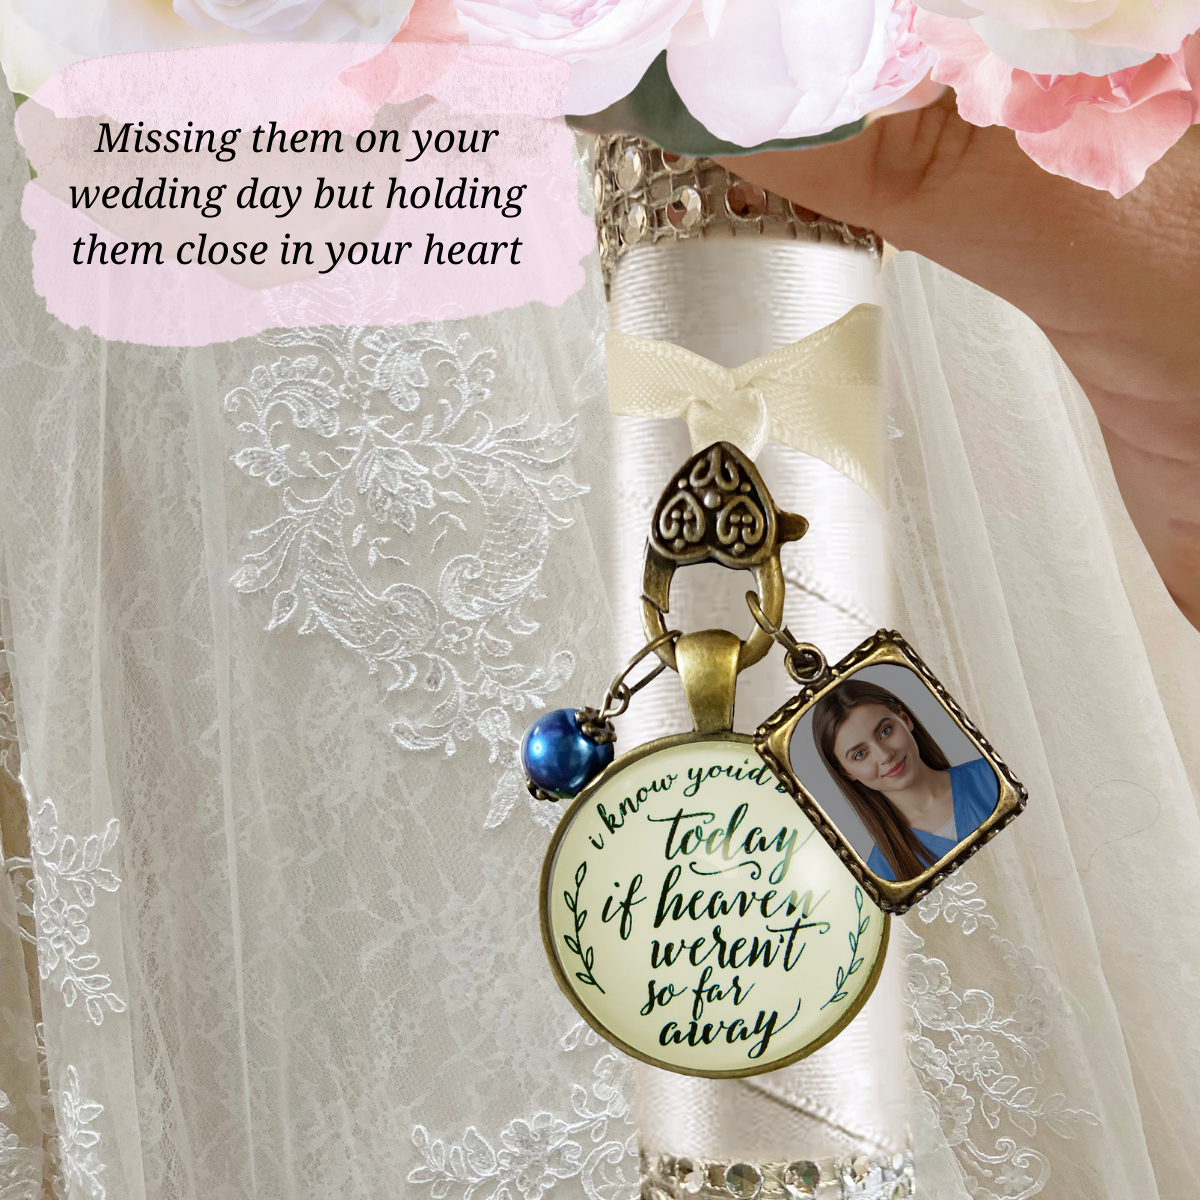 Wedding Bouquet Memorial Charm I Know You'd Be Here Heaven Rustic Memory Photo - Gutsy Goodness